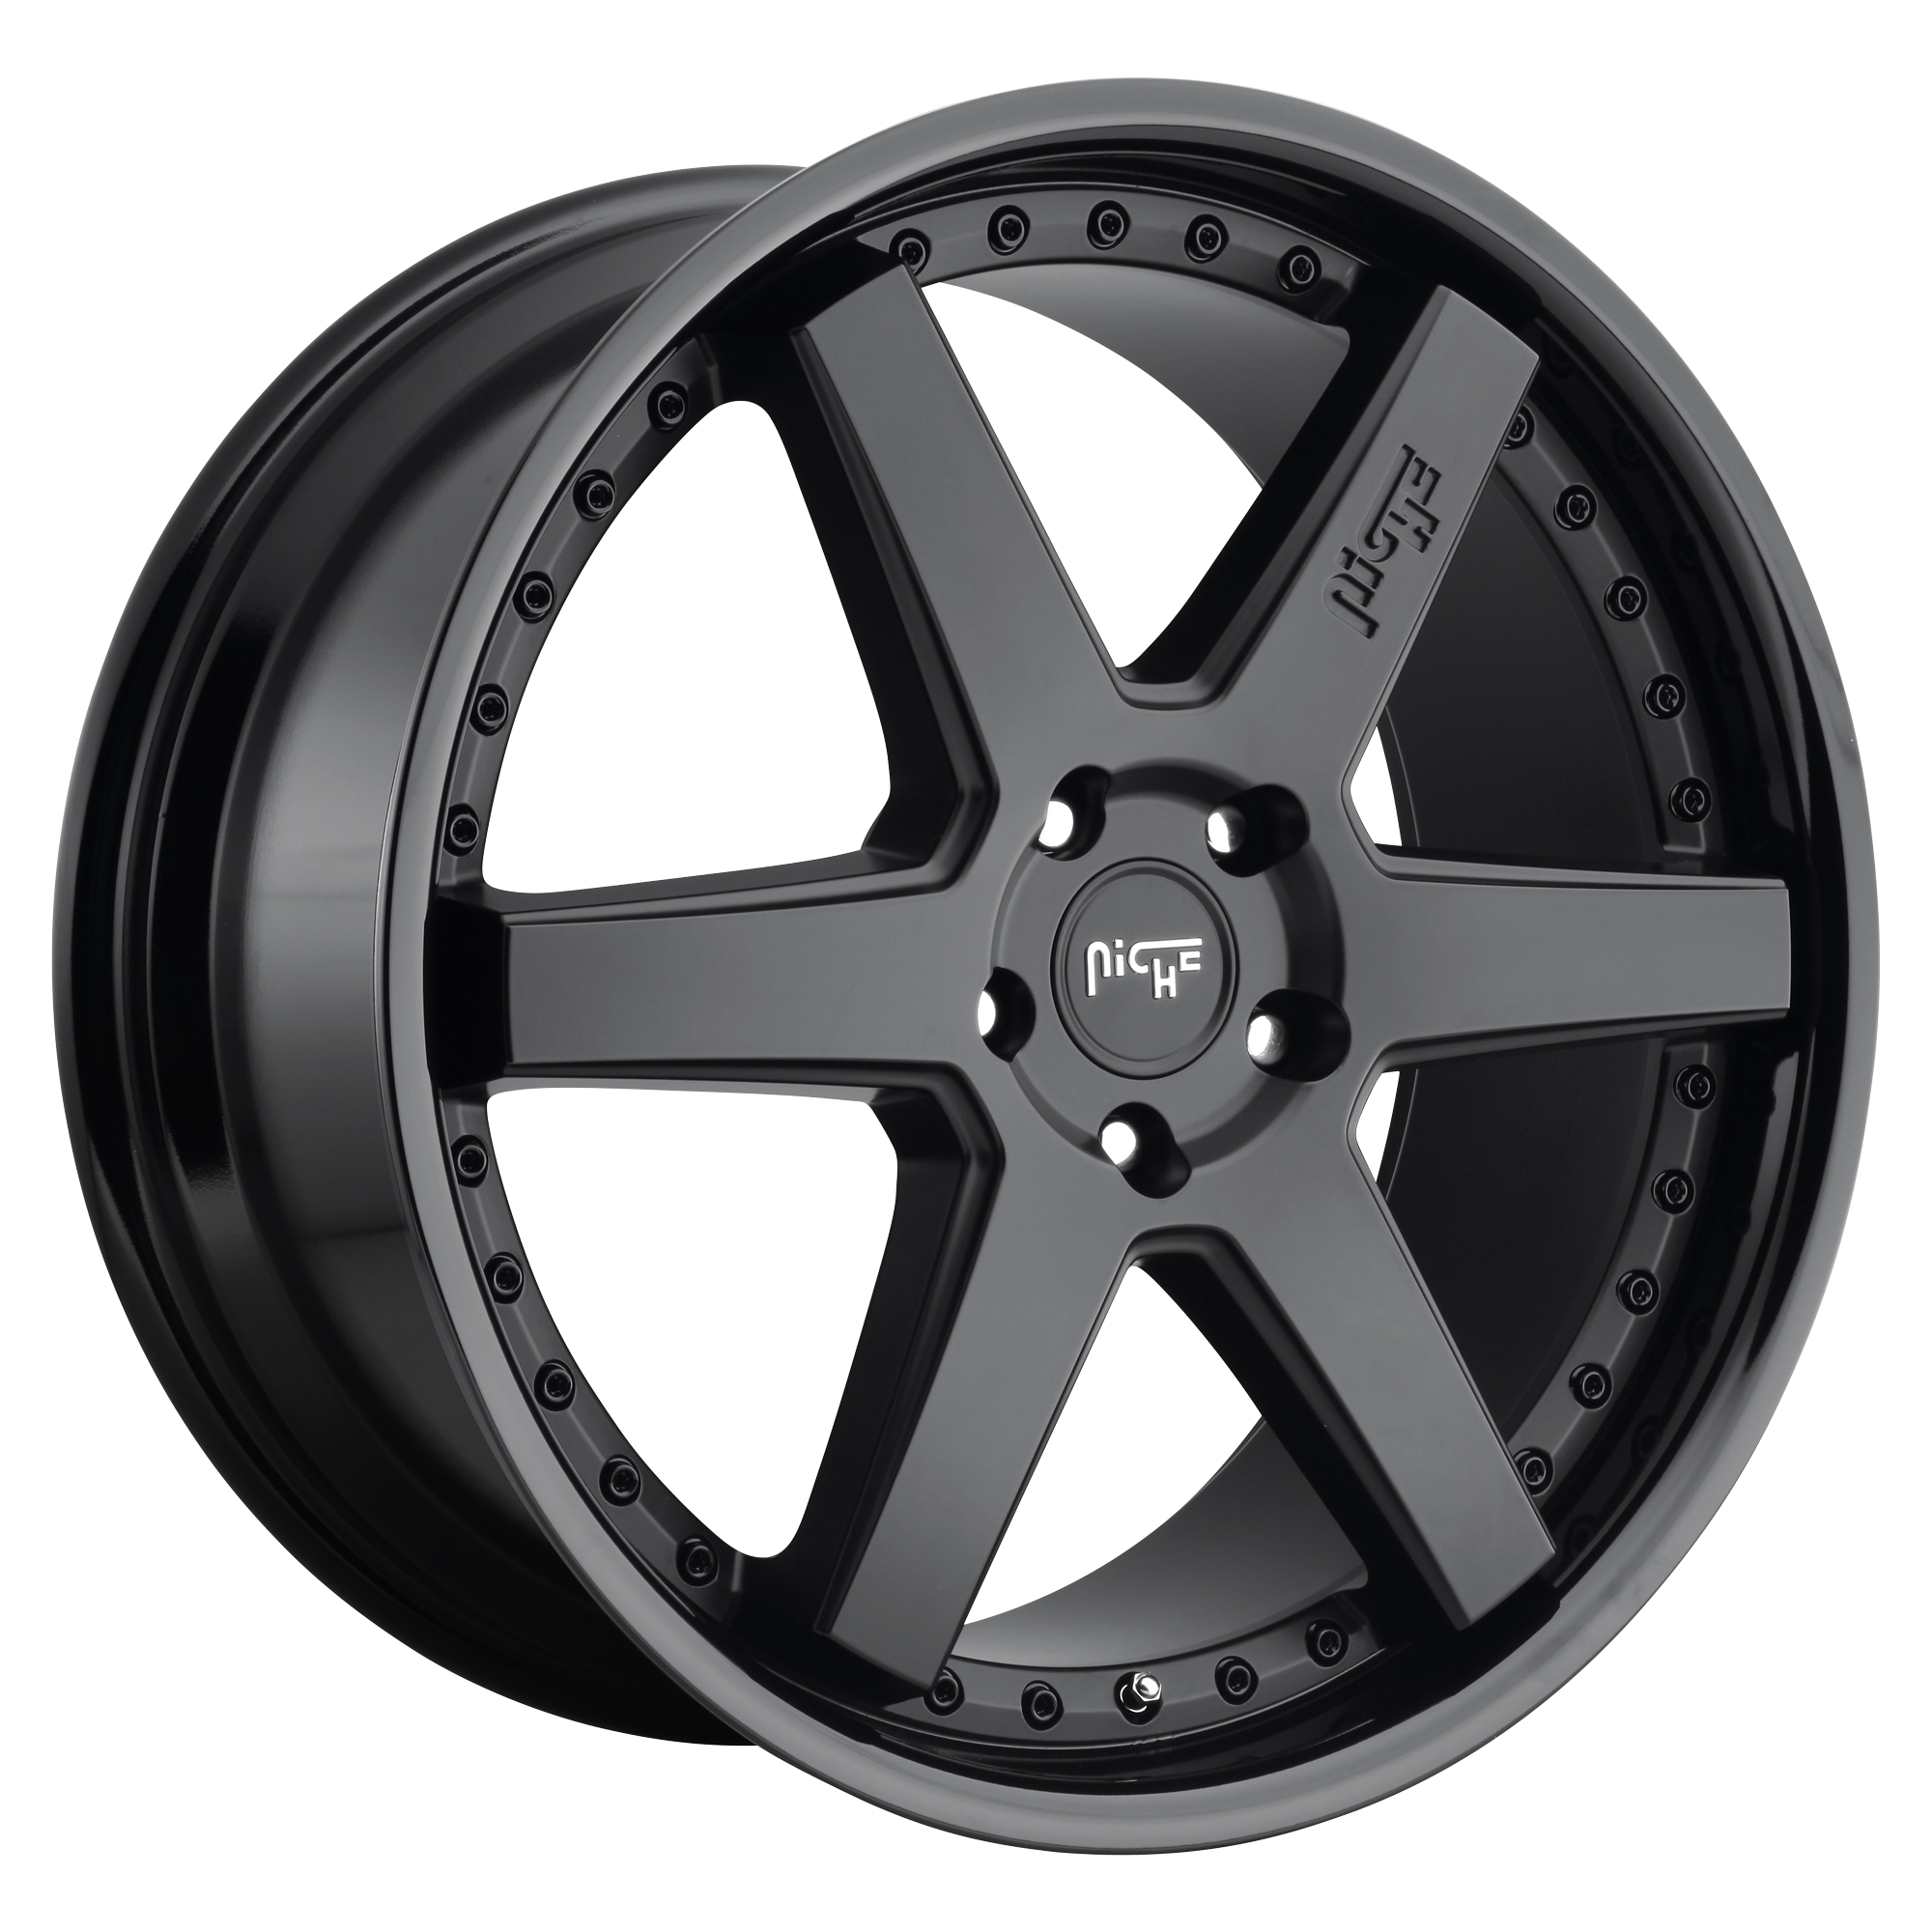 ALTAIR 18x9.5 5x112.00 GLOSS BLACK MATTE BLACK (48 mm) - Tires and Engine Performance